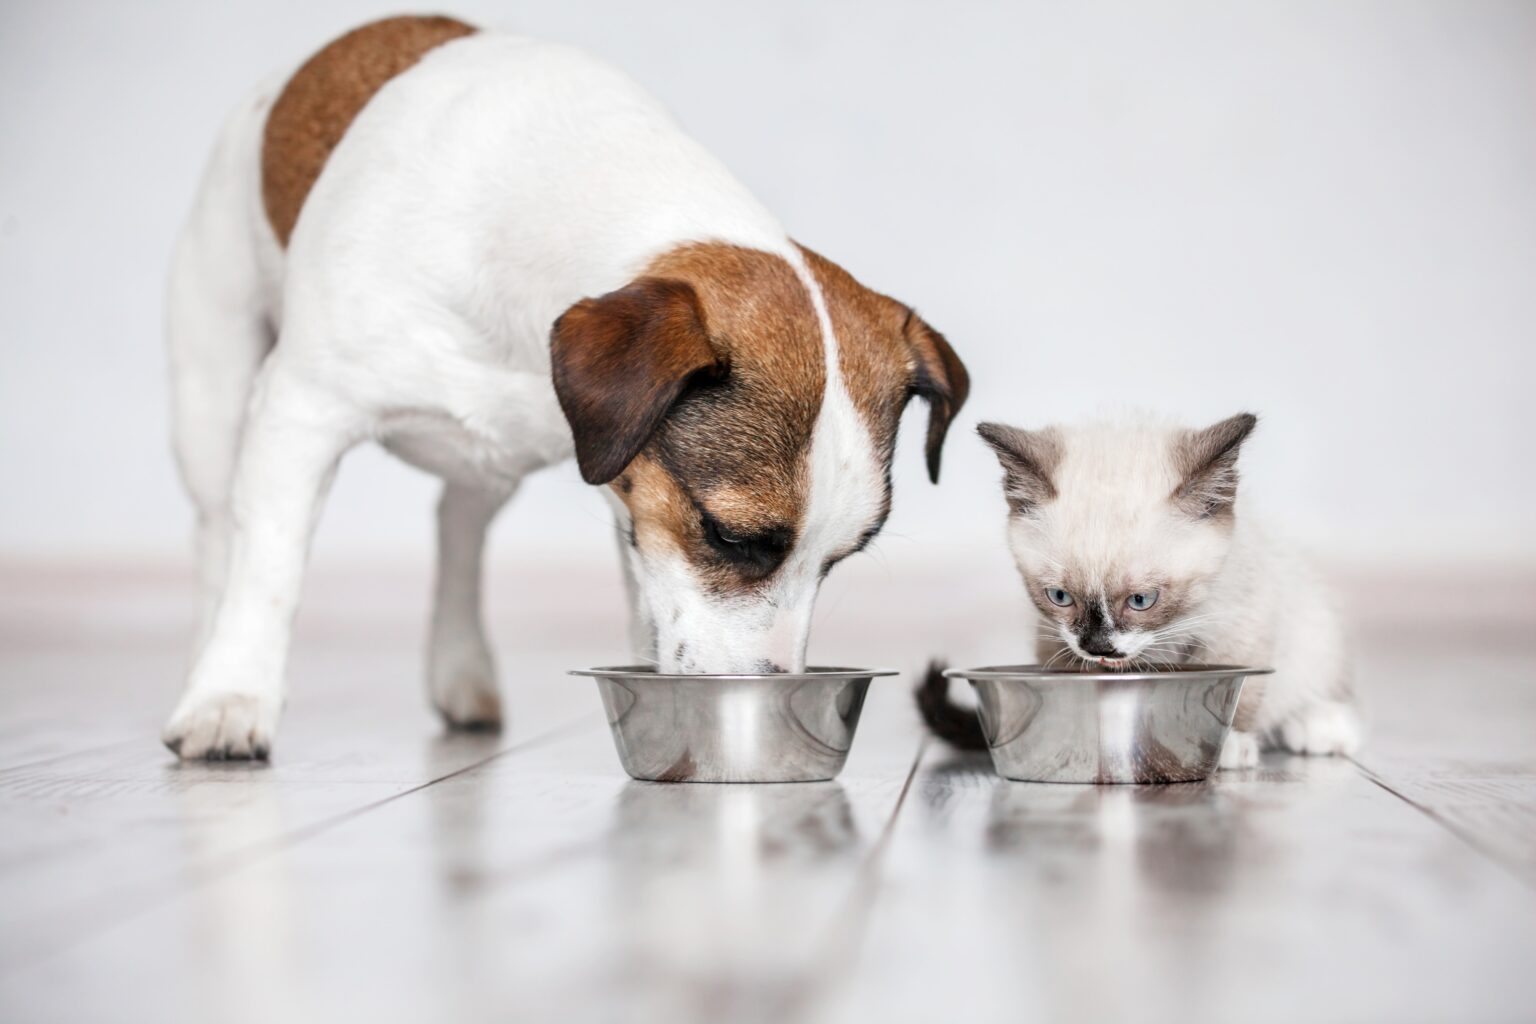 Gray,Little,Cat,And,Dog,Eating,Together,From,Bowls,Indoors.